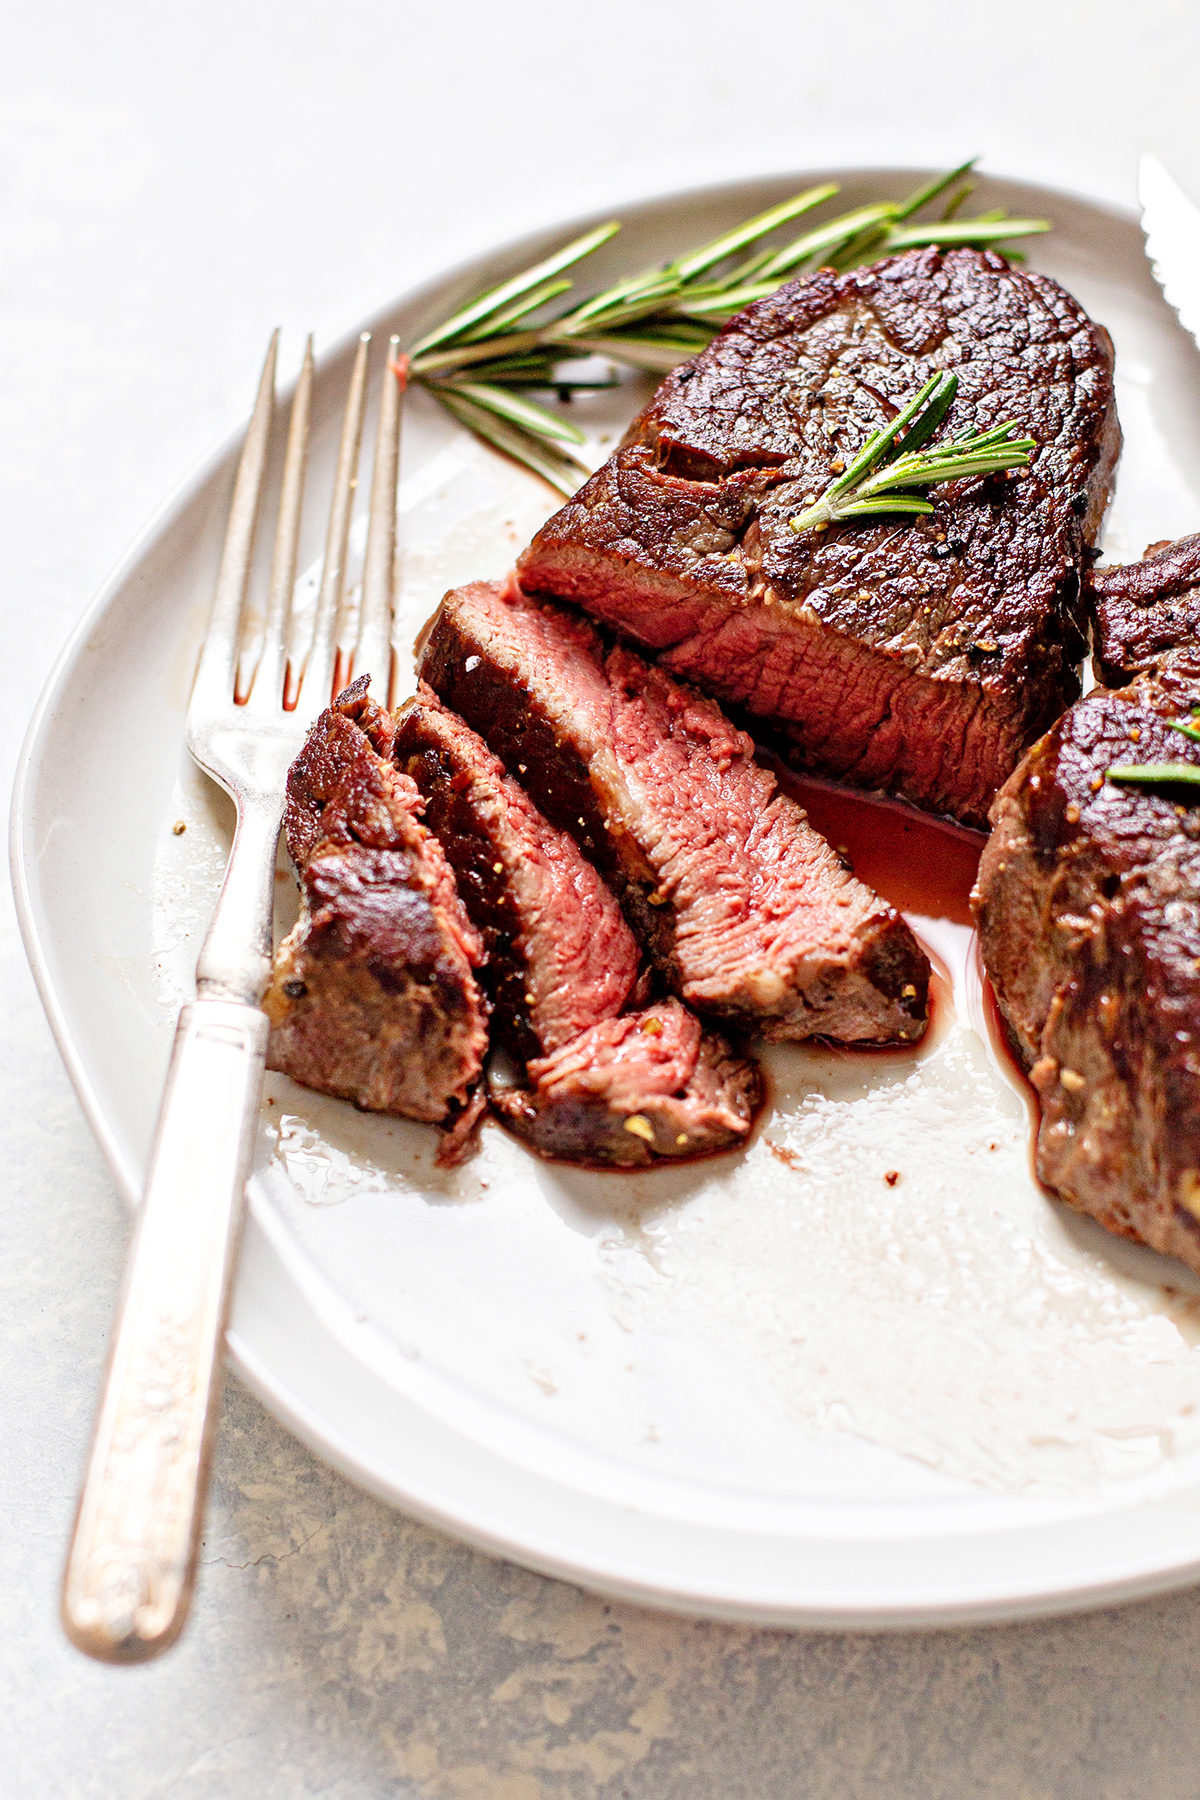 How To Cook A Well-Done Steak So It's Tender and Juicy (Recipe)